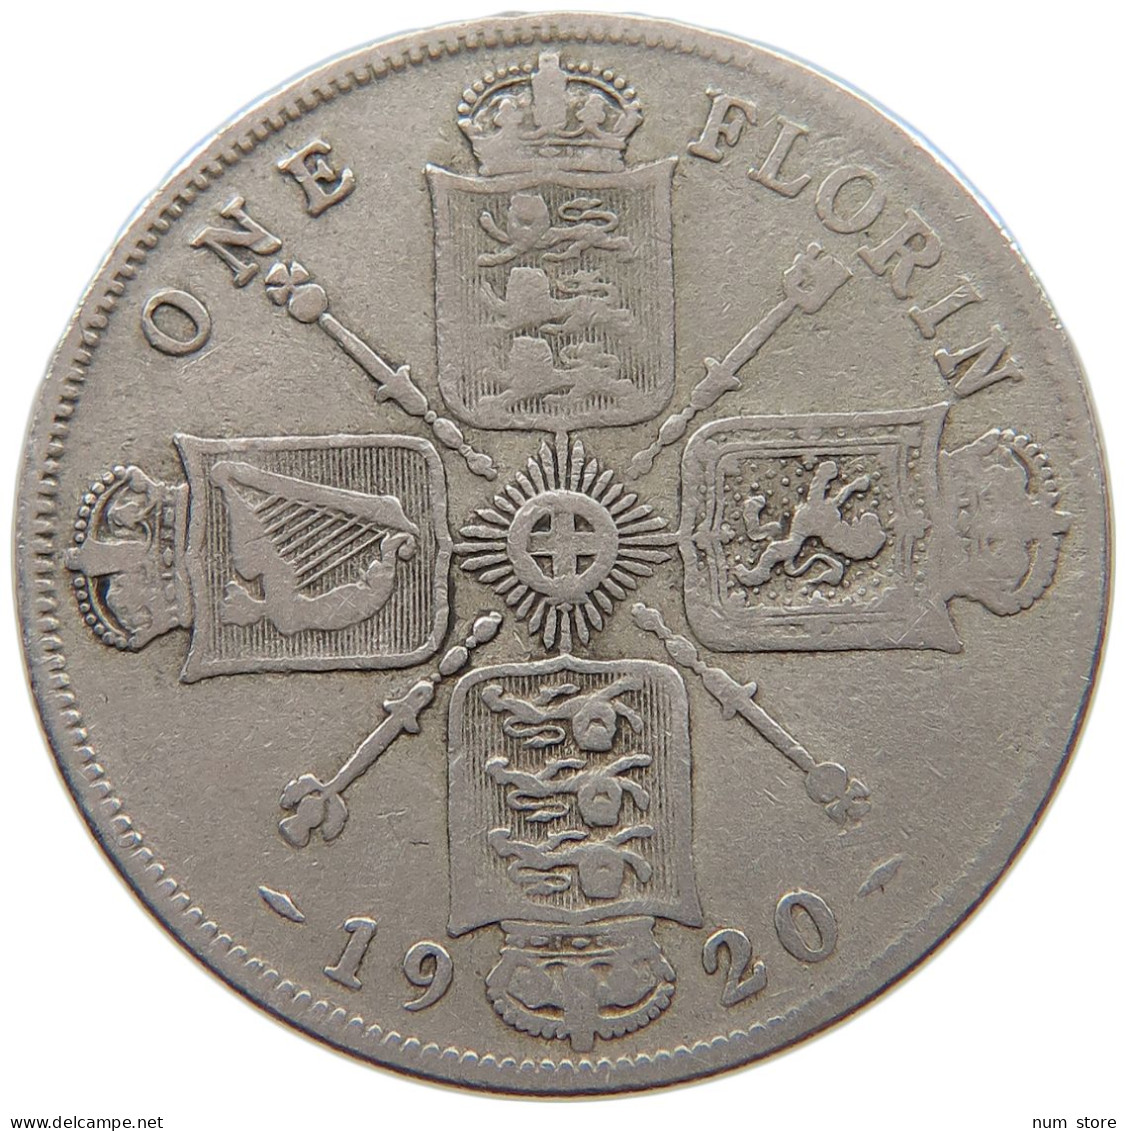 GREAT BRITAIN FLORIN 1920 George V. (1910-1936) #a057 0579 - J. 1 Florin / 2 Shillings